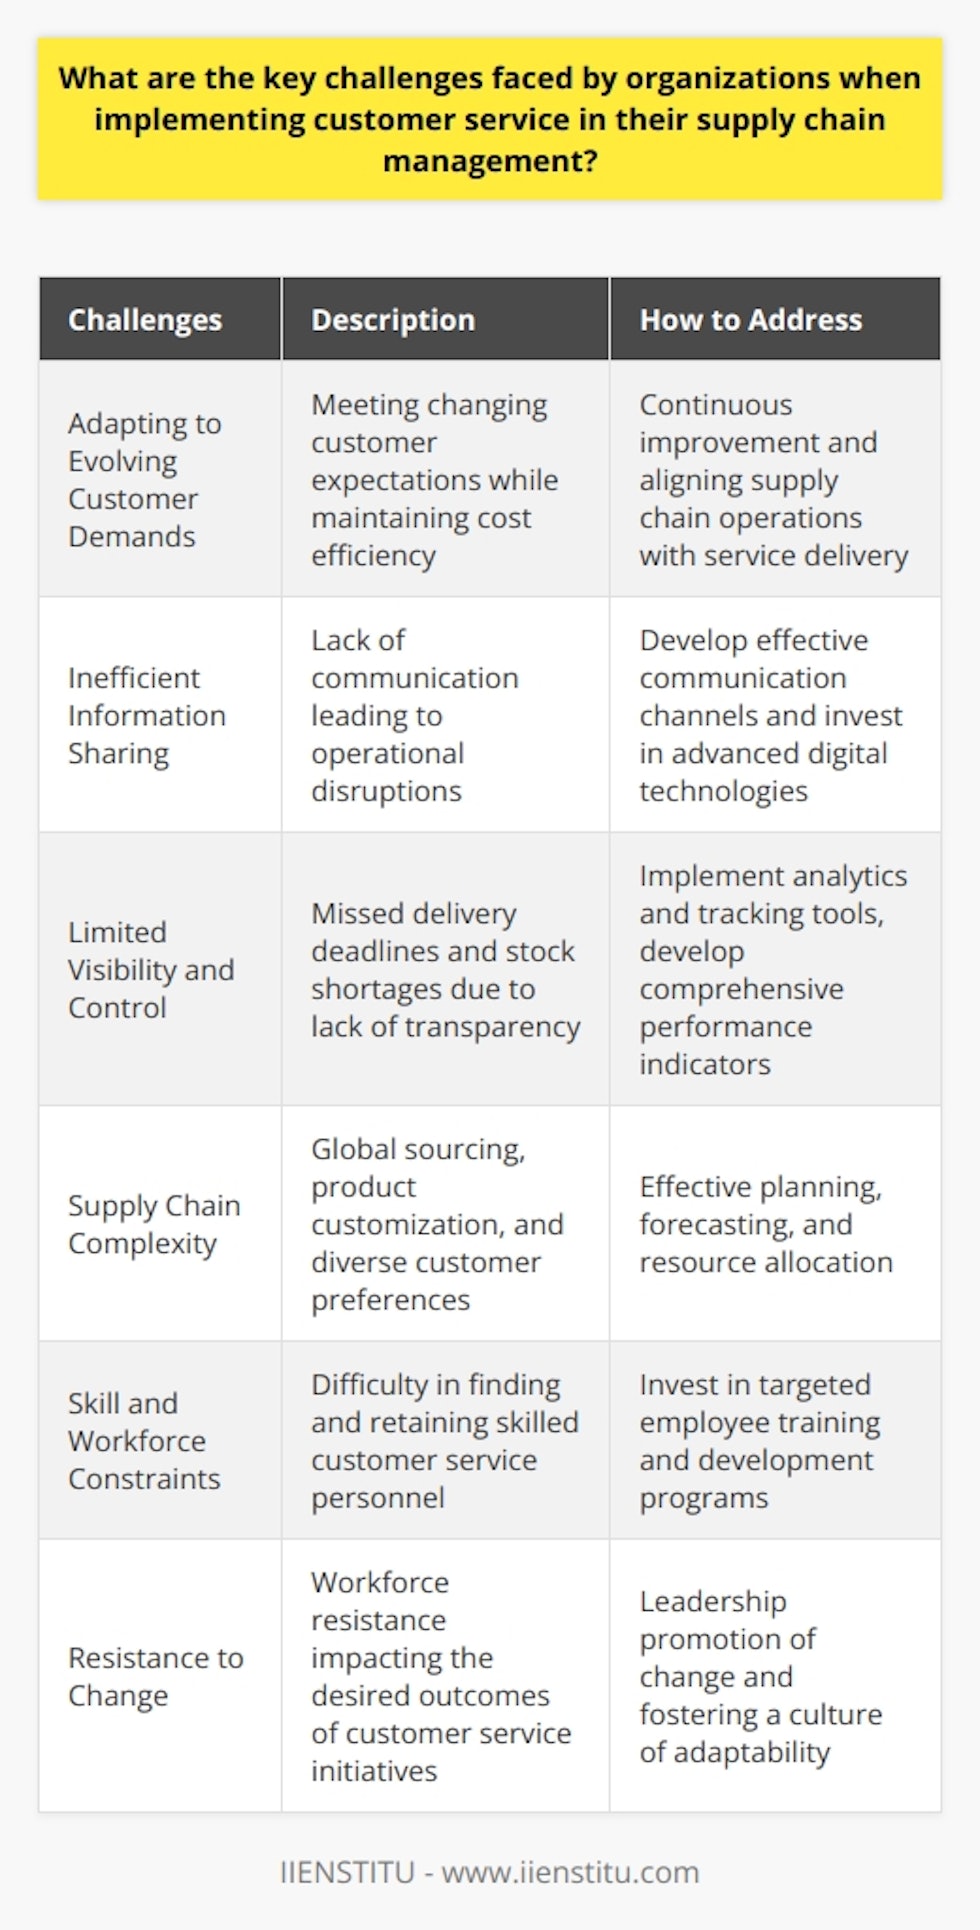 Challenges in Integrating Customer Service into Supply Chain ManagementIntegrating customer service into supply chain management can be a complex and challenging process for organizations. In order to achieve success in today's competitive business environment, it is important to understand and address these challenges. Below are some key challenges that organizations face when implementing customer service in their supply chain management:1. Adapting to Evolving Customer Demands:One of the main challenges is adapting to the ever-changing customer expectations and demands. Meeting customer satisfaction while maintaining cost efficiency is not an easy task, and organizations need to constantly improve their strategies and align their supply chain operations with service delivery.2. Inefficient Information Sharing:Lack of information flow among supply chain entities can lead to miscommunication and operational disruptions. It is important for organizations to develop effective communication channels and invest in advanced digital technologies to enhance real-time collaboration and sharing of information across supply chain partners.3. Limited Visibility and Control:Visibility and control over the entire supply chain are crucial for effective customer service management. Lack of transparency in supply chain processes can result in missed delivery deadlines, stock shortages, and decreased customer satisfaction. Implementing advanced analytics and tracking tools, as well as developing comprehensive performance indicators, can help address this challenge.4. Supply Chain Complexity:Modern supply chains are becoming increasingly complex due to factors such as global sourcing, product customization, and diverse customer preferences. Dealing with these complexities requires effective planning, forecasting, and resource allocation, all of which are vital components of a cohesive customer service strategy.5. Skill and Workforce Constraints:Finding and retaining skilled customer service personnel who can understand customers' diverse needs and expectations can be a major challenge. The lack of trained staff poses a significant hurdle to integrating customer service within the supply chain. To overcome this, organizations need to invest in targeted employee training and development programs.6. Resistance to Change:When implementing customer service into supply chain management, organizations often face resistance to change among their workforce. This resistance can hinder the transformation process and impact the desired business outcomes of customer service initiatives. Leadership plays a crucial role in promoting change and fostering a culture of adaptability among employees.In conclusion, integrating customer service into supply chain management poses several key challenges for organizations. Adapting to evolving customer demands, addressing inefficient information sharing, ensuring visibility and control, dealing with supply chain complexity, overcoming skill and workforce constraints, and managing resistance to change are all important factors to consider. Overcoming these challenges requires a strategic approach focused on continuous improvement, collaboration, transparency, effective communication, and employee training and development. By addressing these challenges, organizations can achieve long-term success in their customer service and supply chain management efforts.